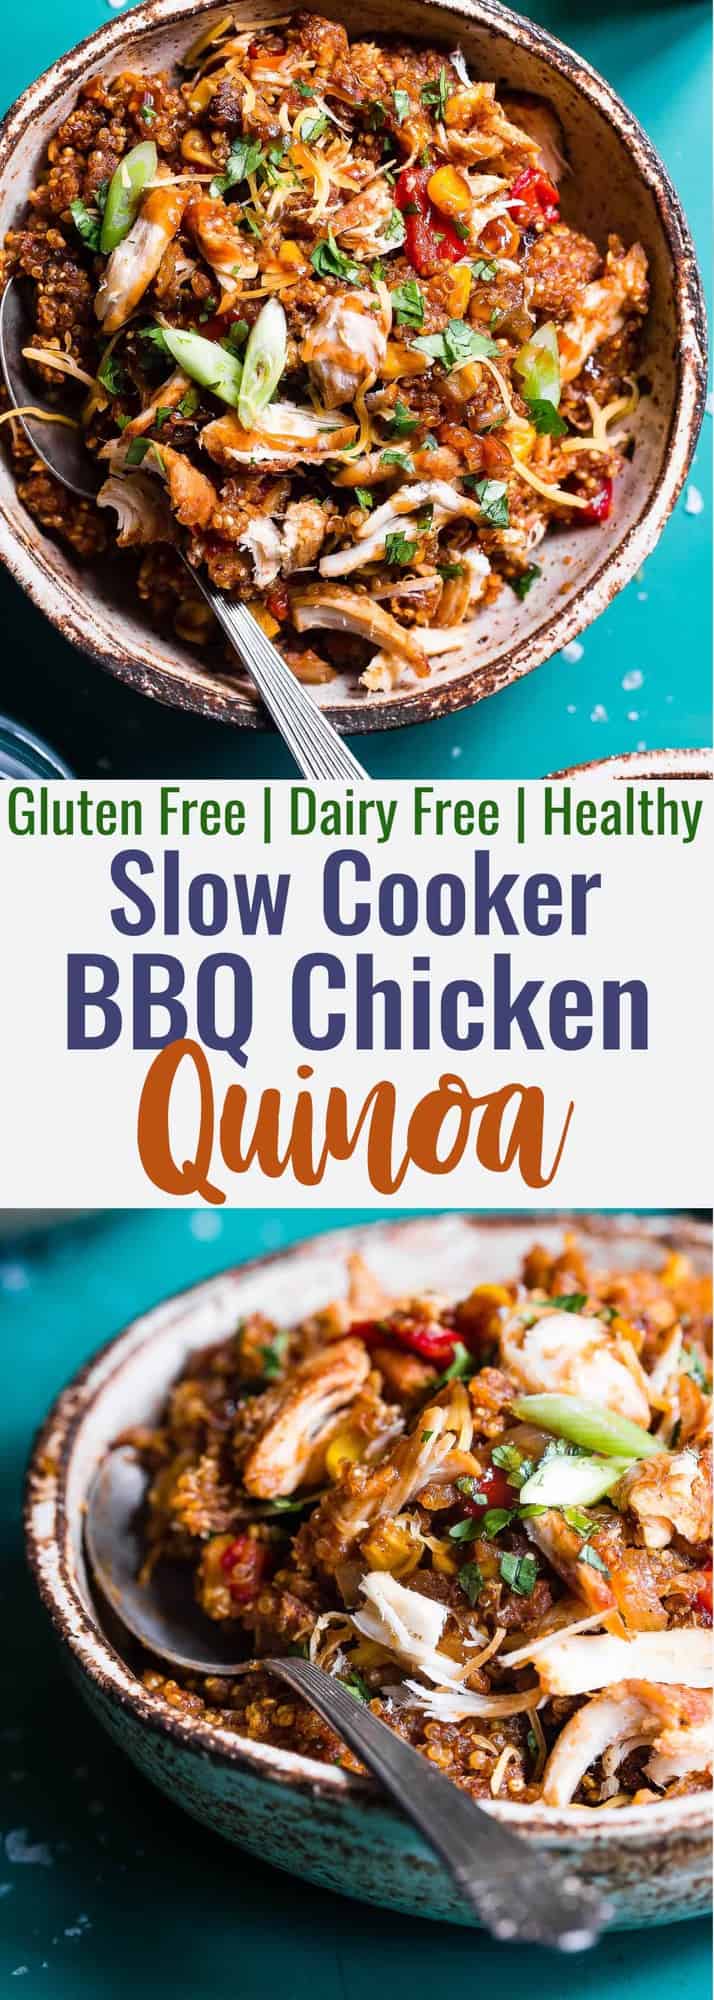 Slow Cooker Healthy BBQ Chicken Quinoa Casserole - This chicken and quinoa casserole is made in the crock pot so it's SUPER quick and easy. Perfect for weeknights and the WHOLE family will love it - even picky eaters! | #Foodfaithfitness | #Glutenfree #Dairyfree #Healthy #Slowcooker #Crockpot